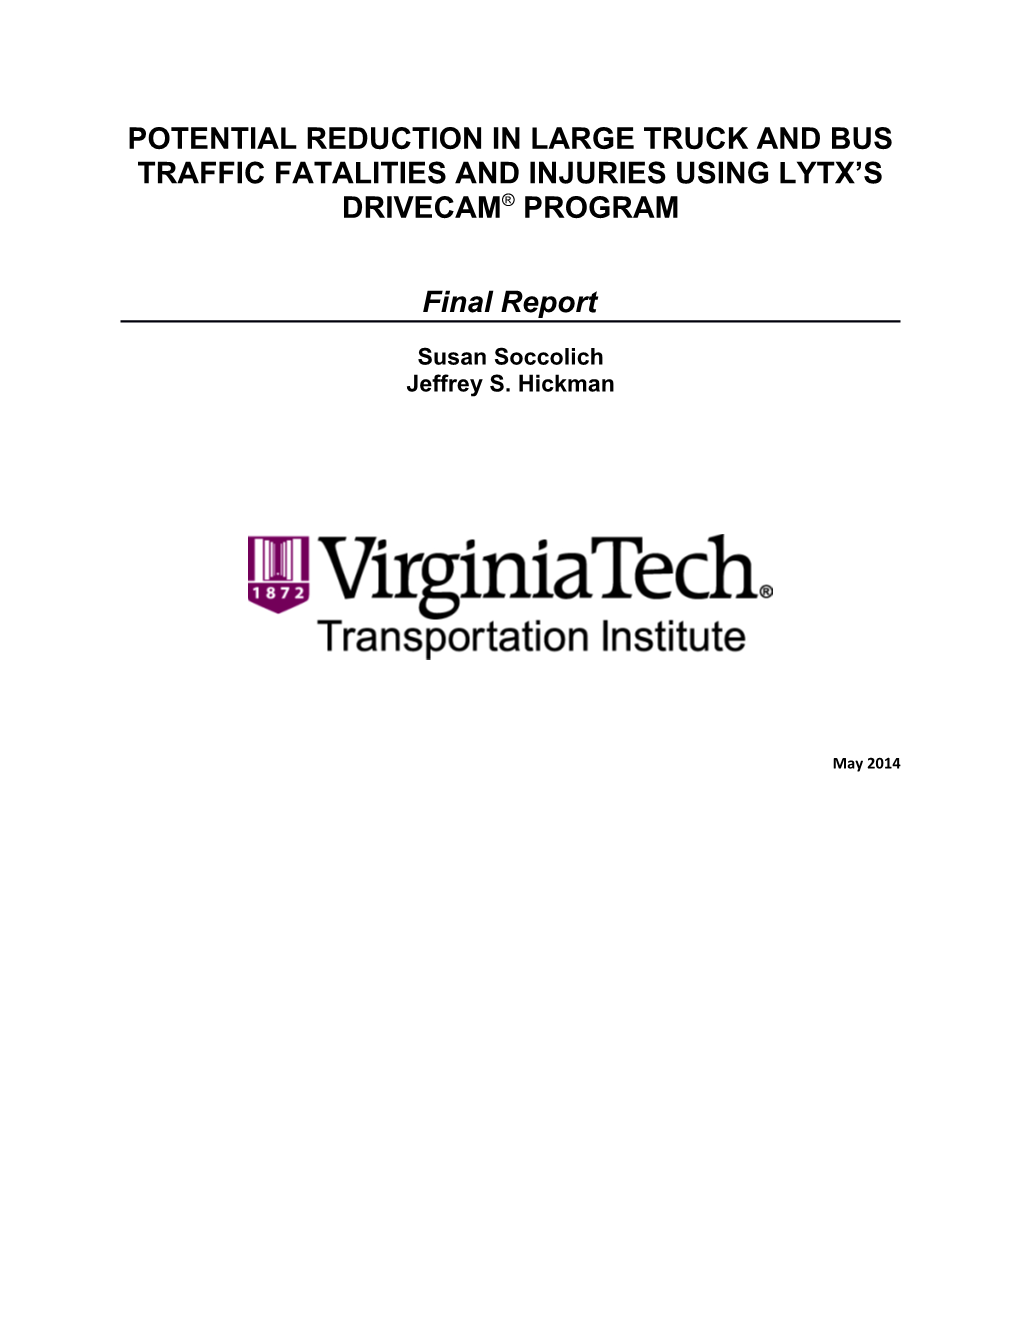 Potential Reduction in Large Truck and Bus Traffic Fatalities and Injuries Using Lytx